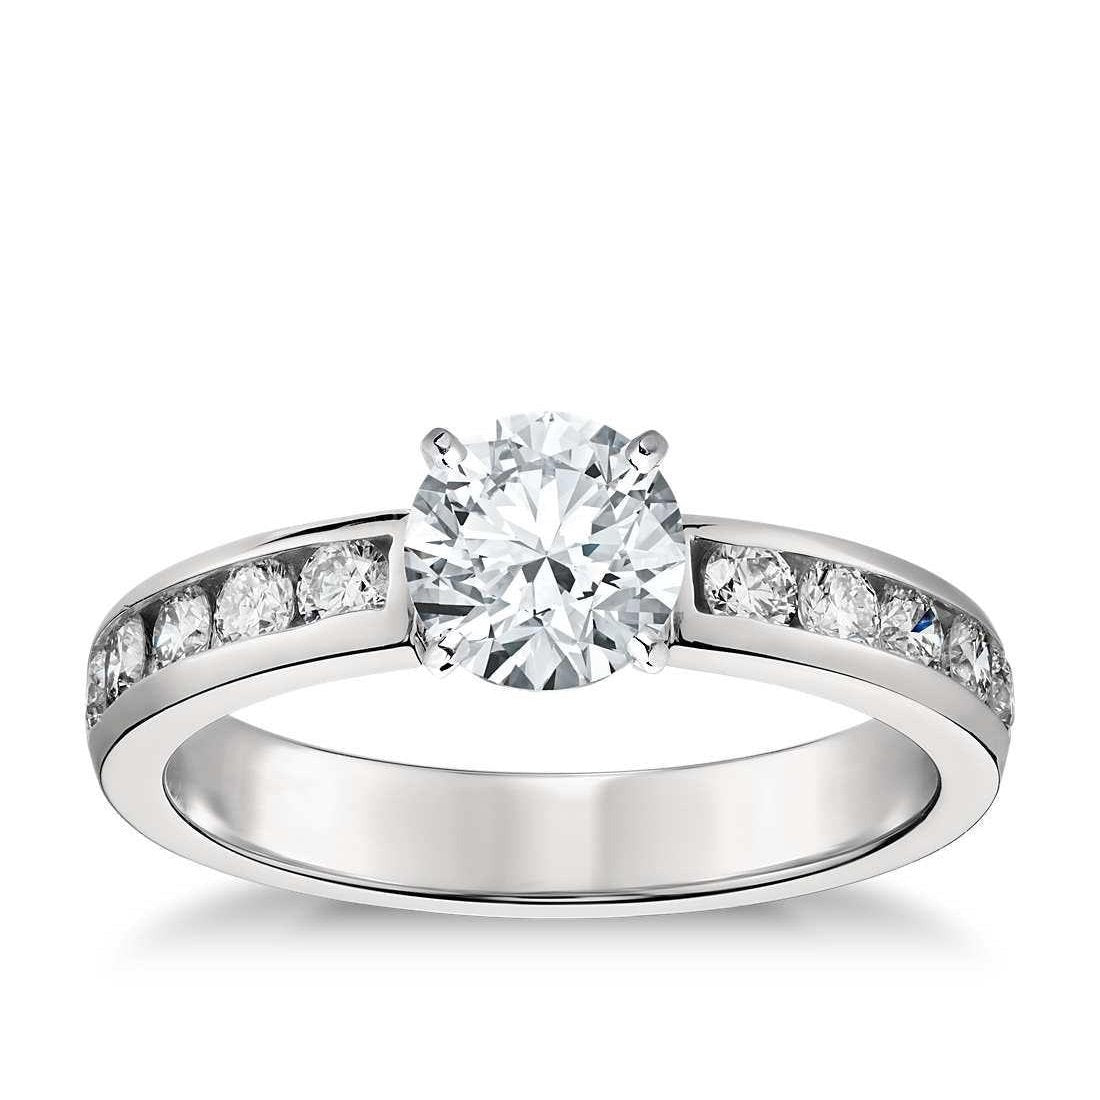 Sparkling 2.90 Ct Round Real Diamond Ring White Gold 14K New - Solitaire Ring with Accents-harrychadent.ca